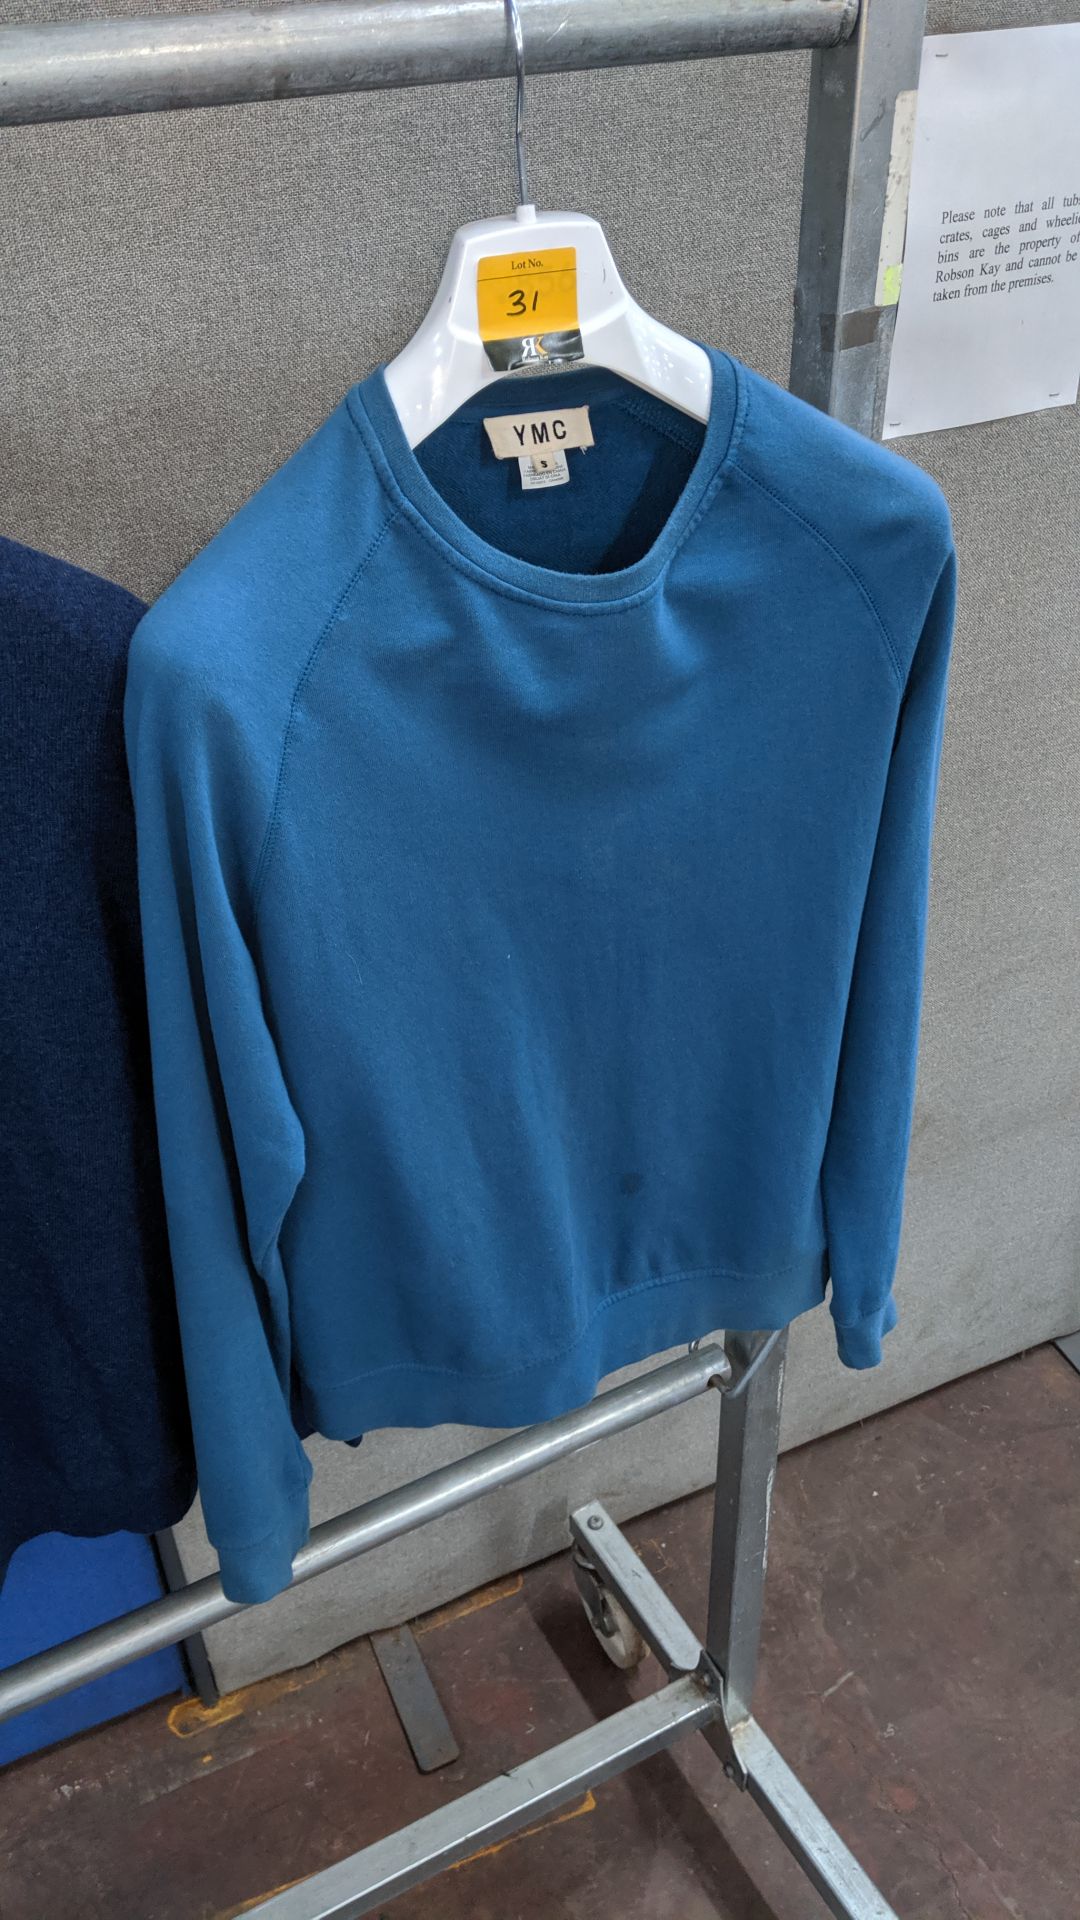 4 off assorted jumpers by Le Fix, Miyuki-Zoku, Folk & YMC. This is one of a number of lots being - Image 6 of 6